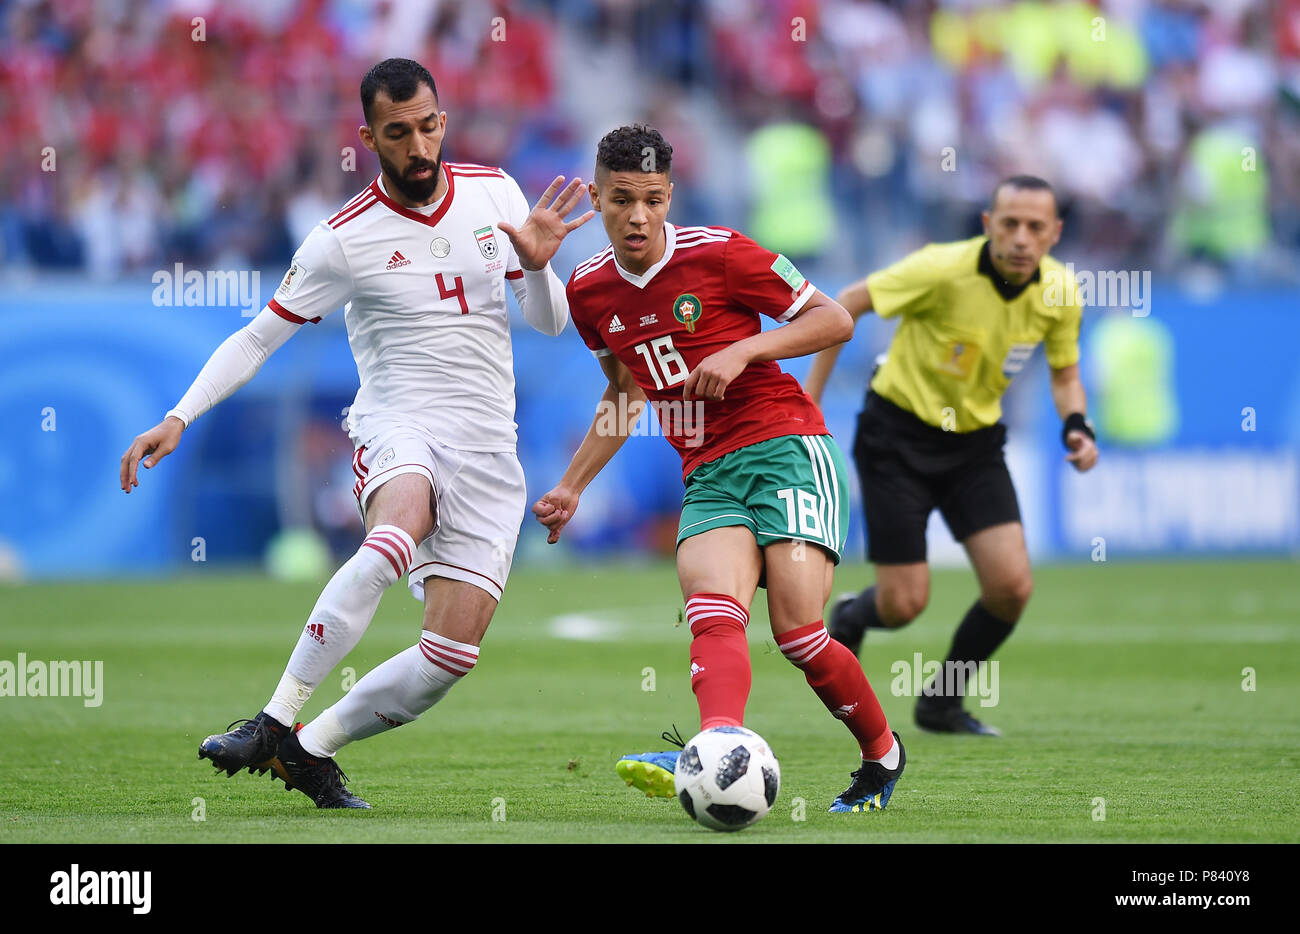 SAINT PETERSBURG, RUSSIA - JUNE 15: Roozbeh Cheshmi of IR Iran competes with Amine Harit of Morocco during the 2018 FIFA World Cup Russia group B match between Morocco and Iran at Saint Petersburg Stadium on June 15, 2018 in Saint Petersburg, Russia. (Photo by Lukasz Laskowski/PressFocus/MB Media) Stock Photo